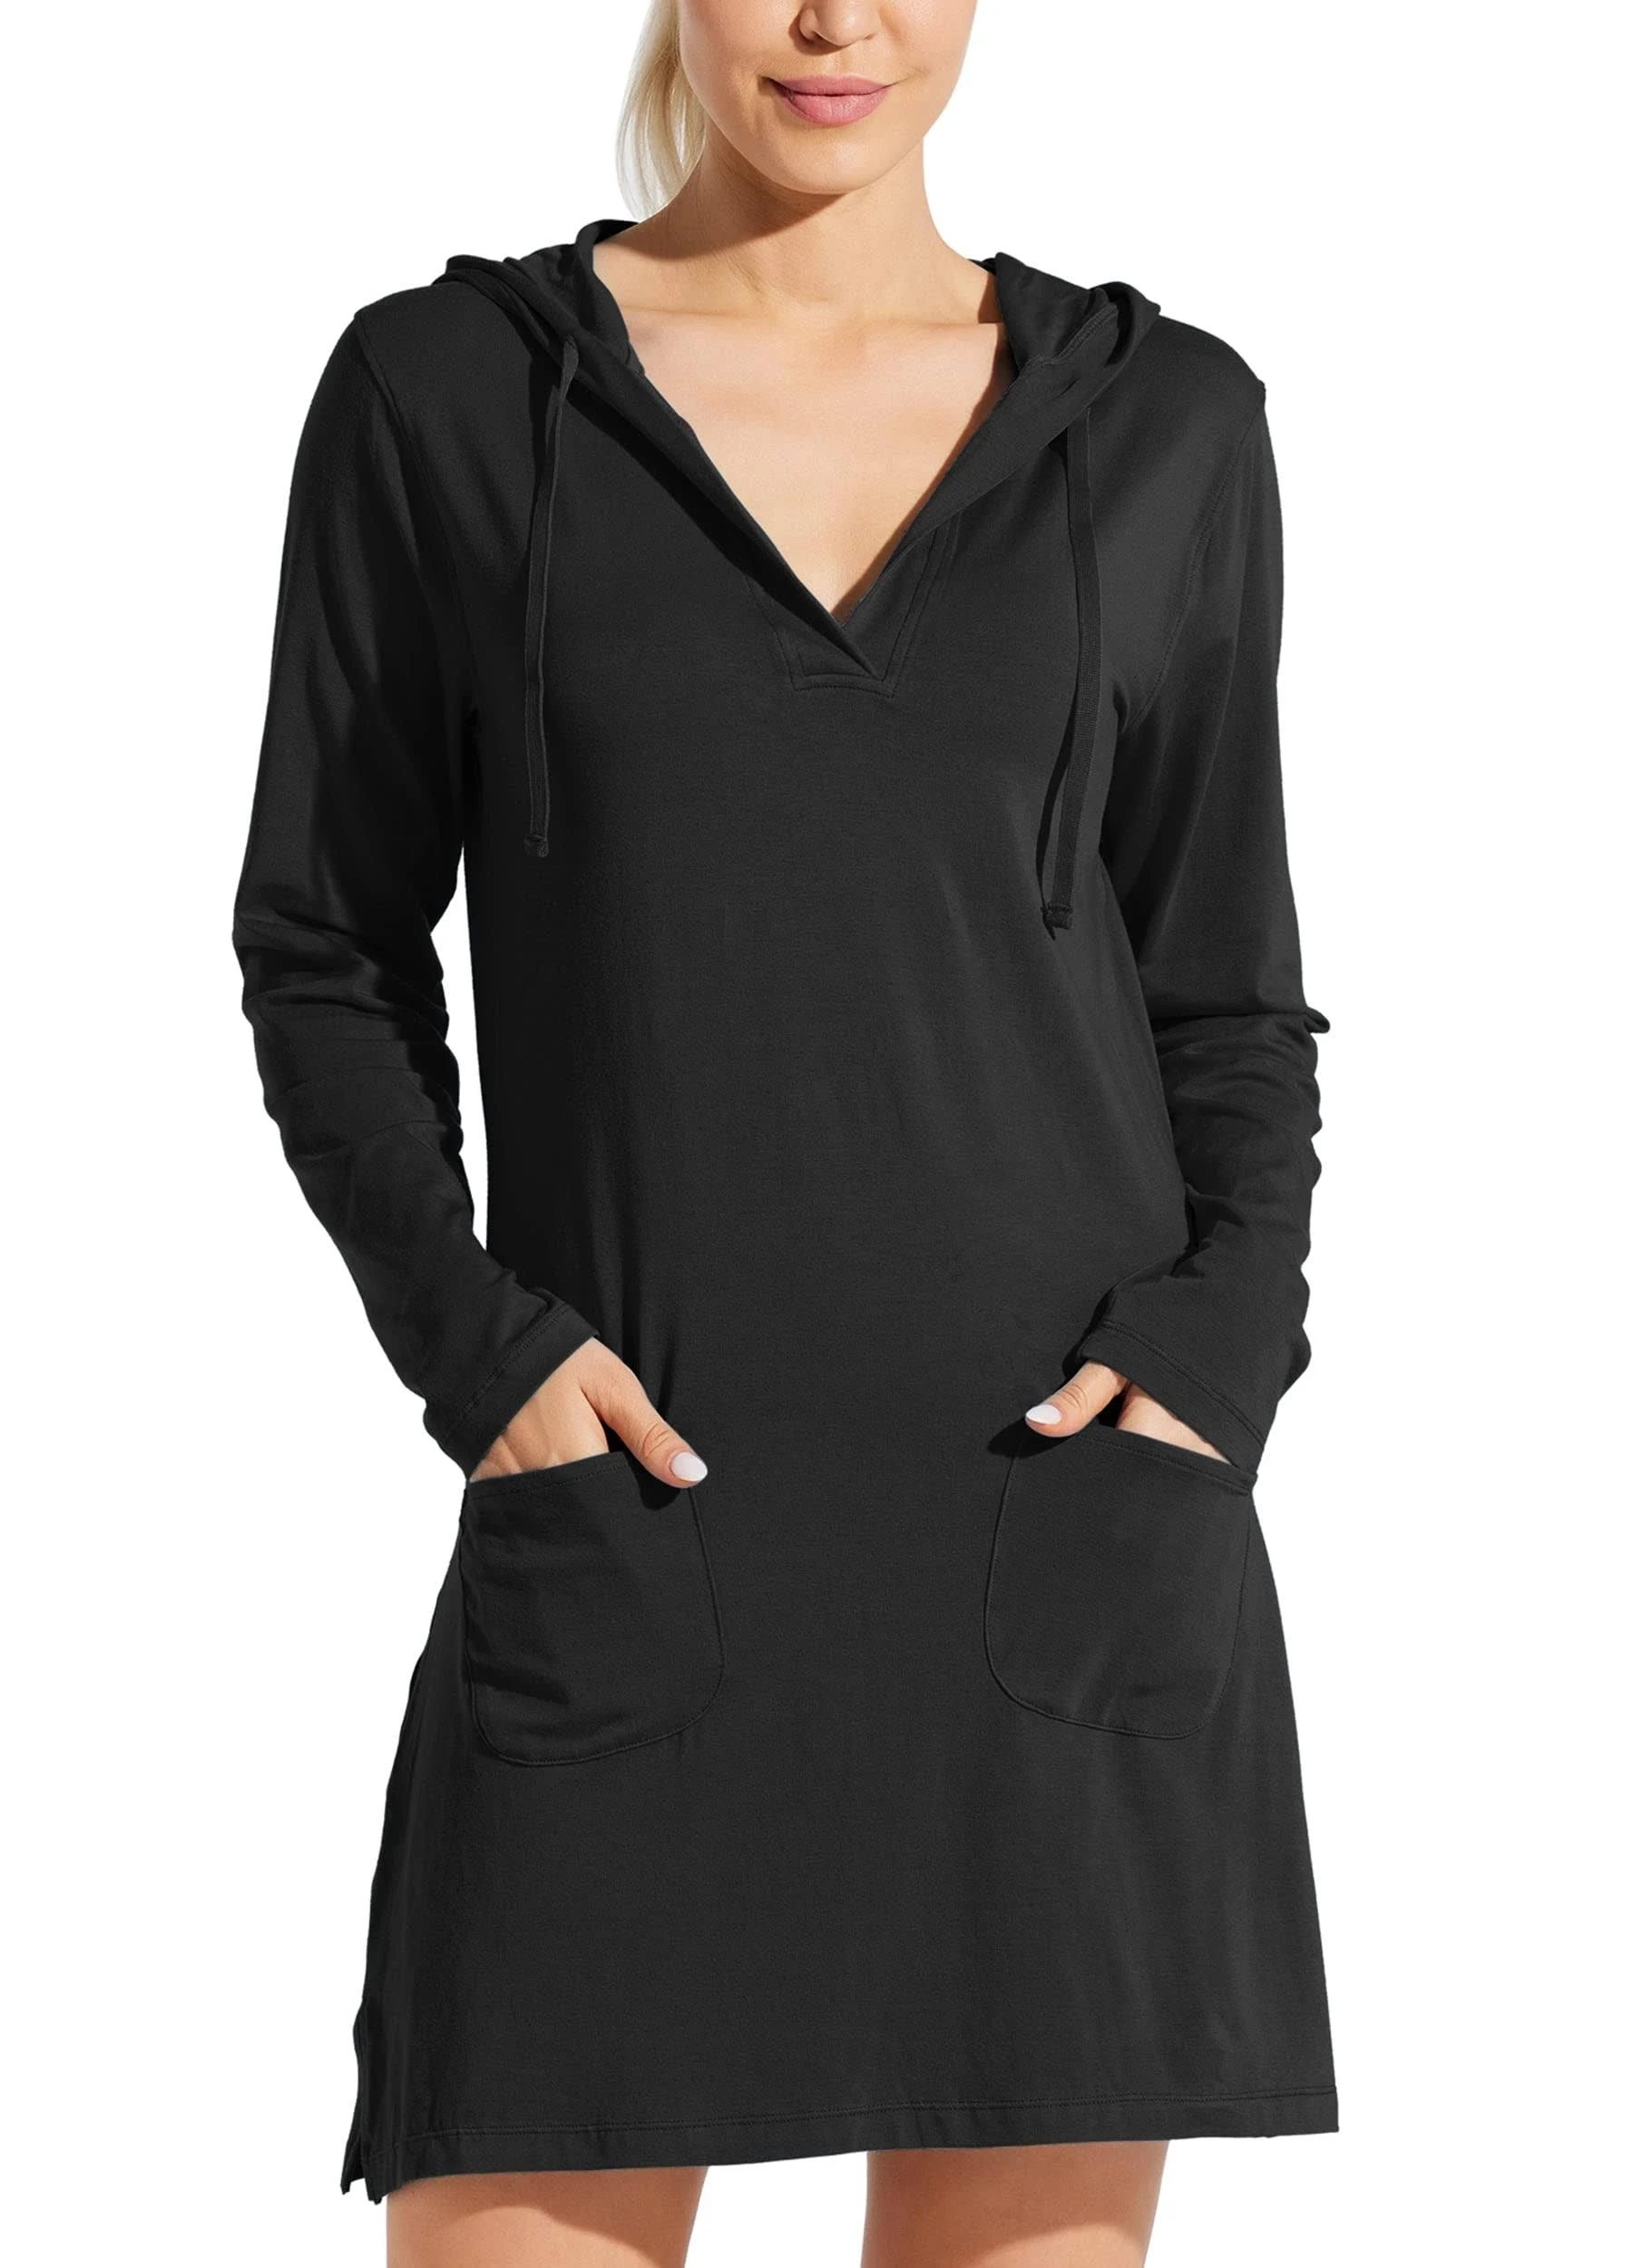 Ultra-Soft Swim Wrap Dress for Sun Protection and Comfort | Image